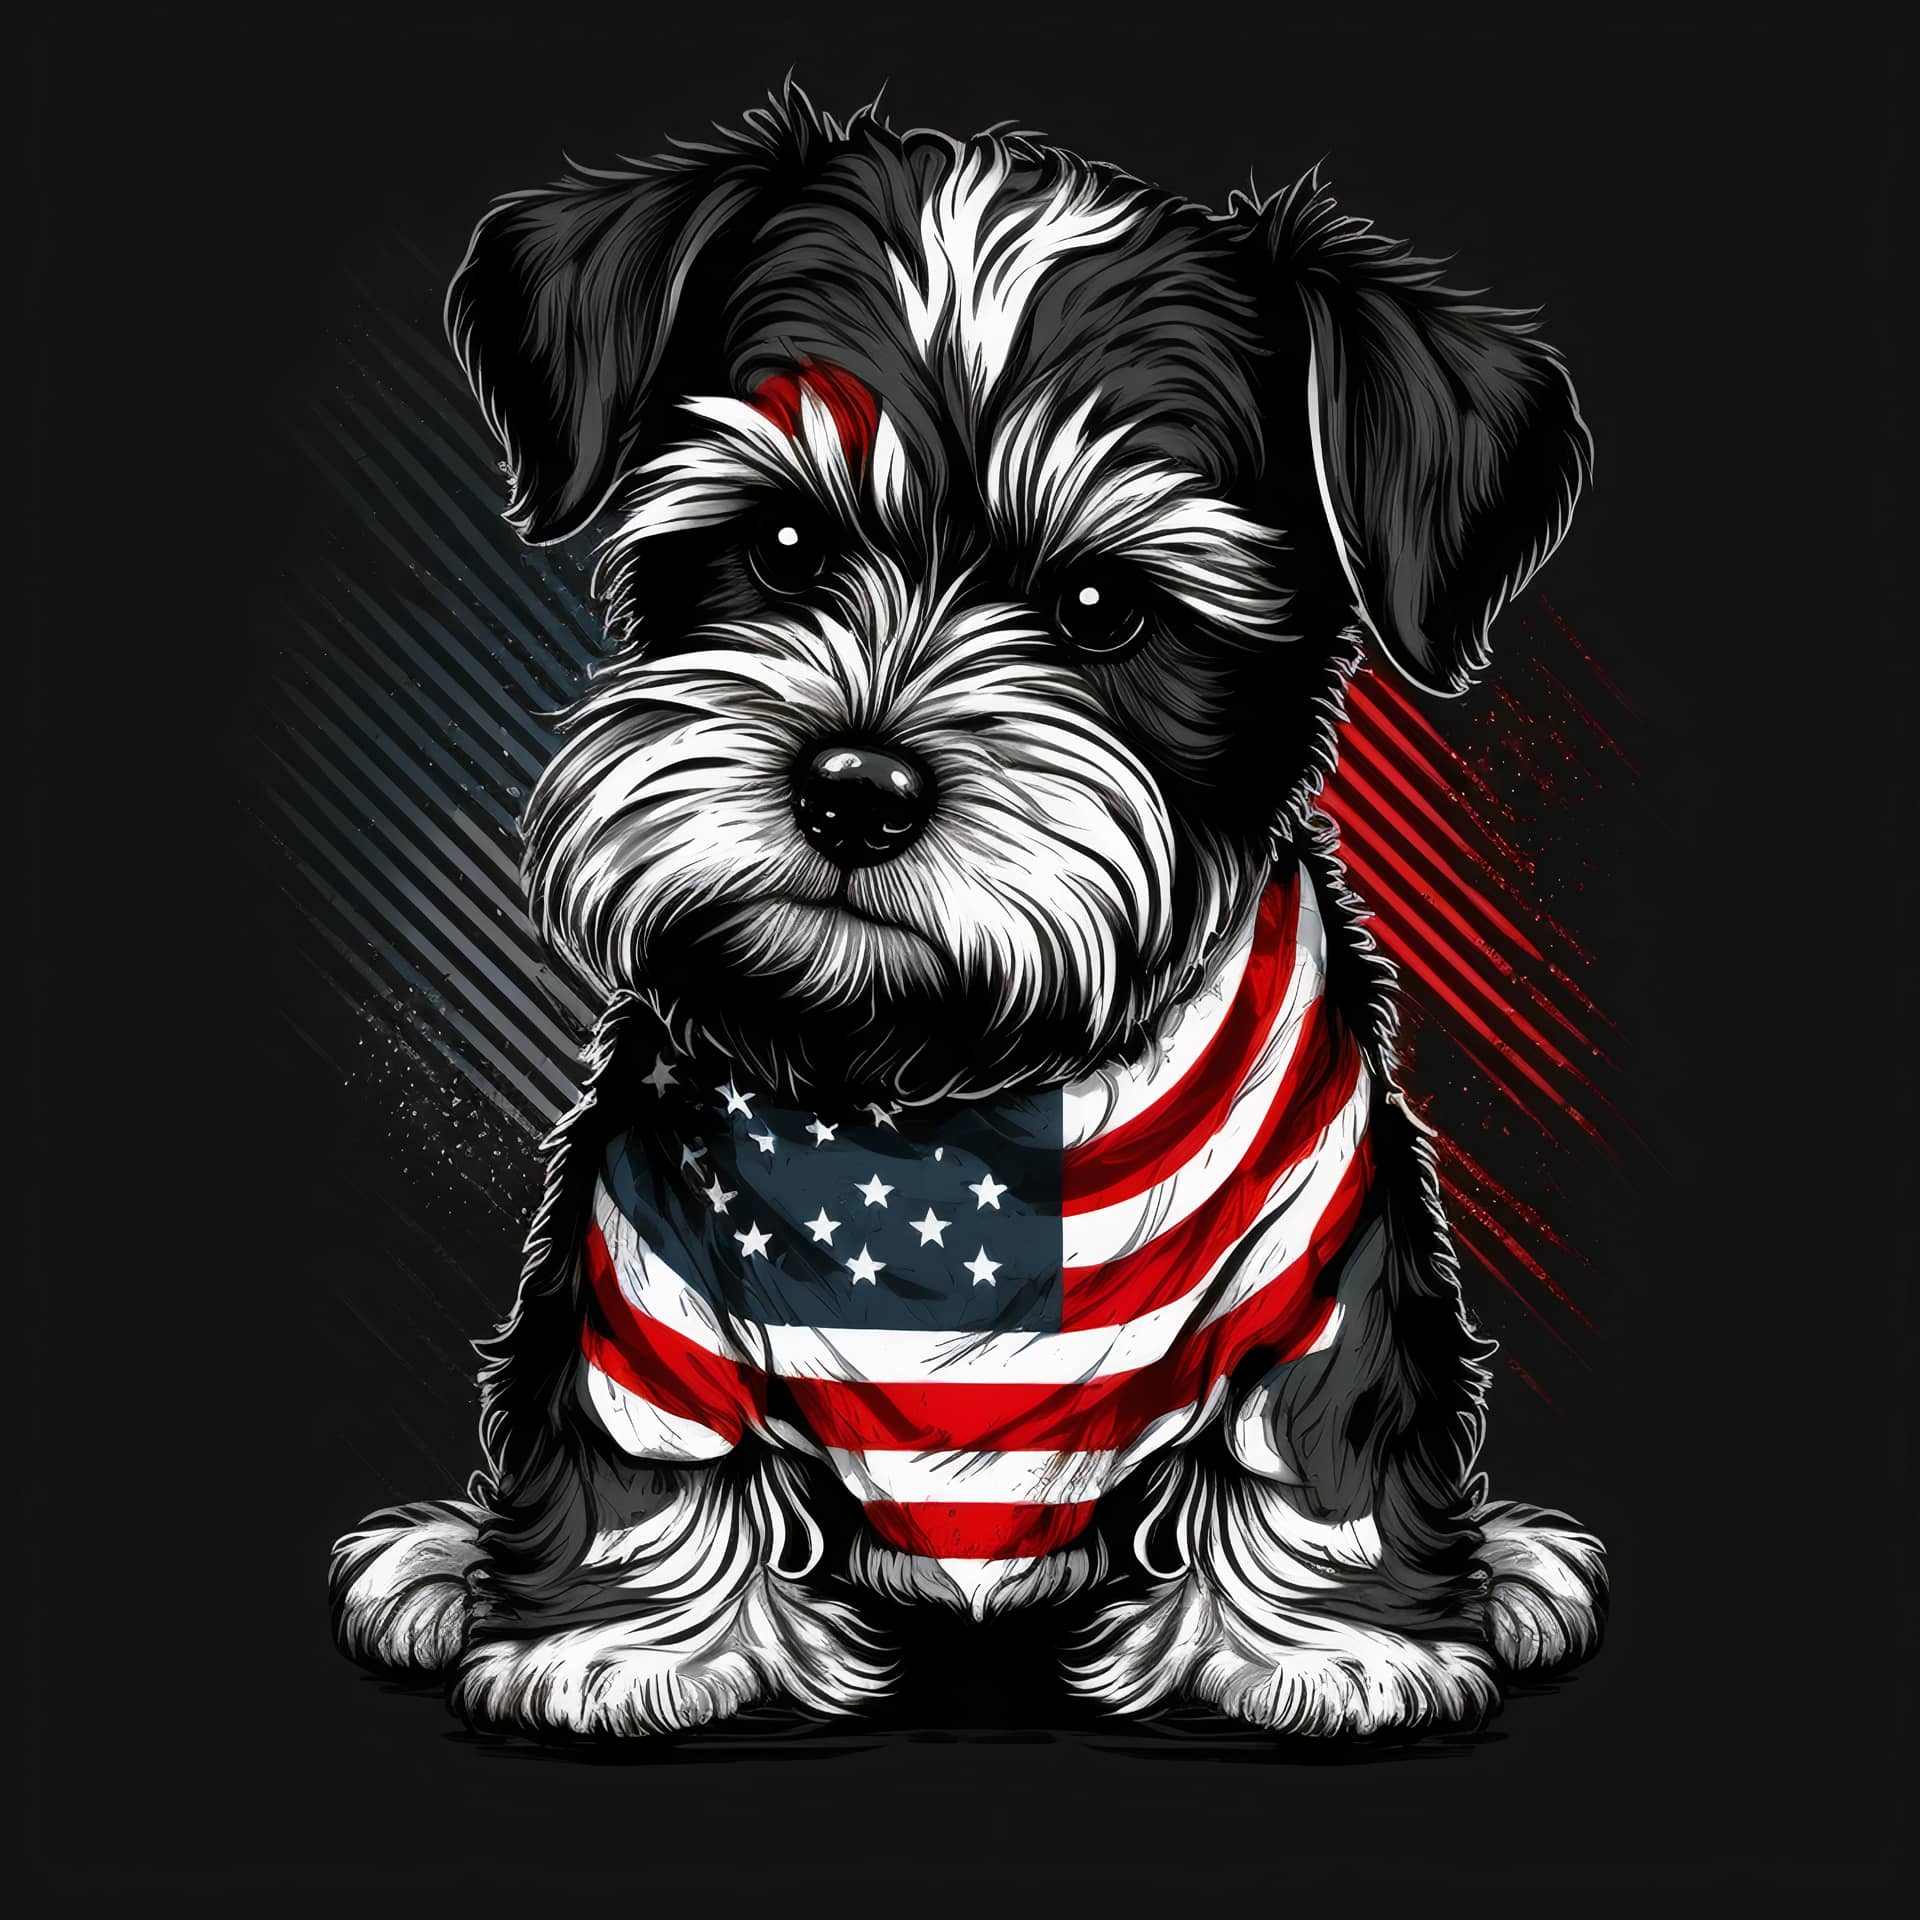 Dog design with american flag excellent image